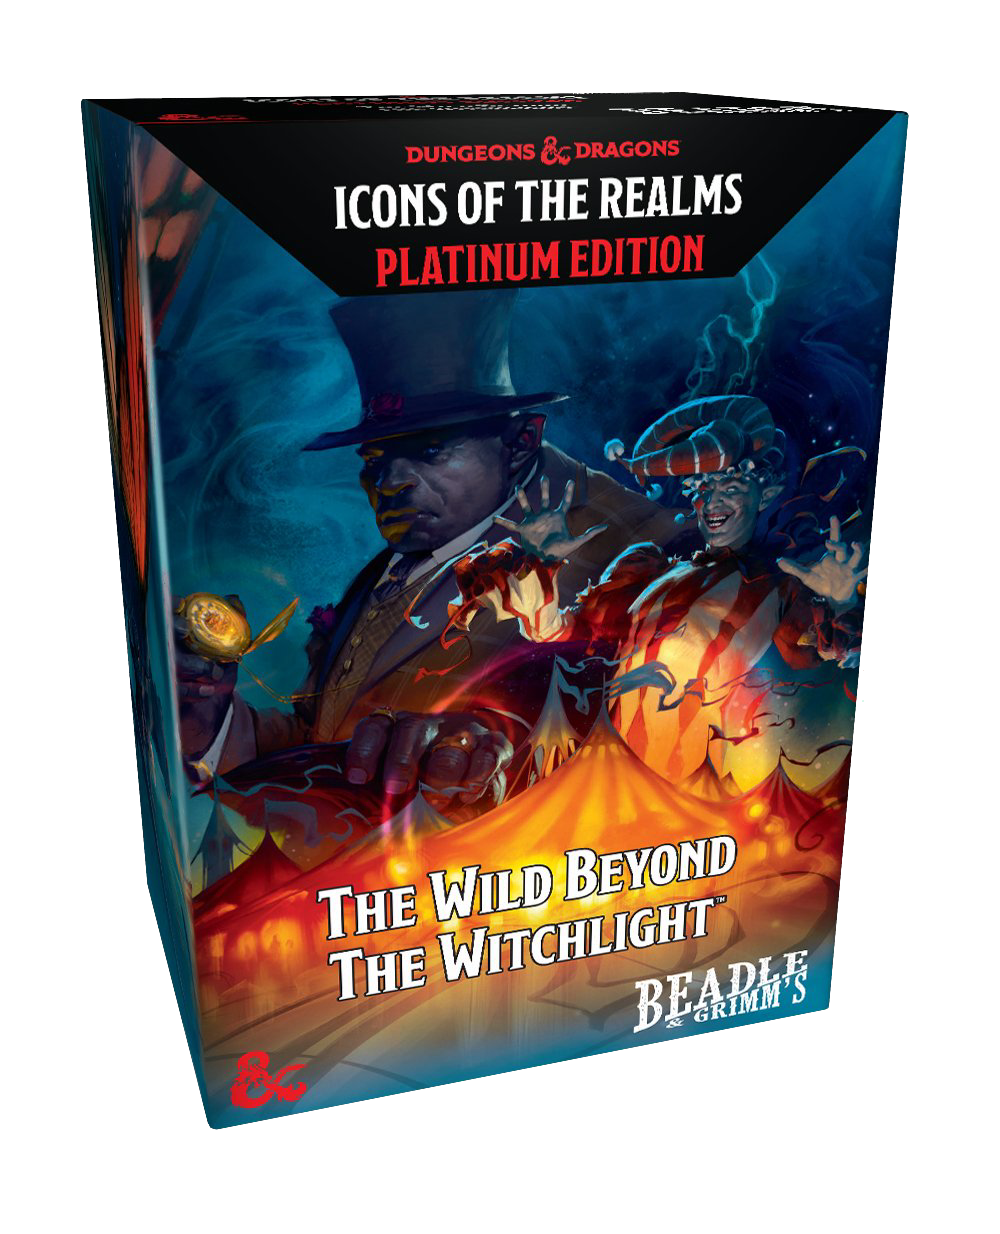 Platinum Edition of The Wild Beyond the Witchlight